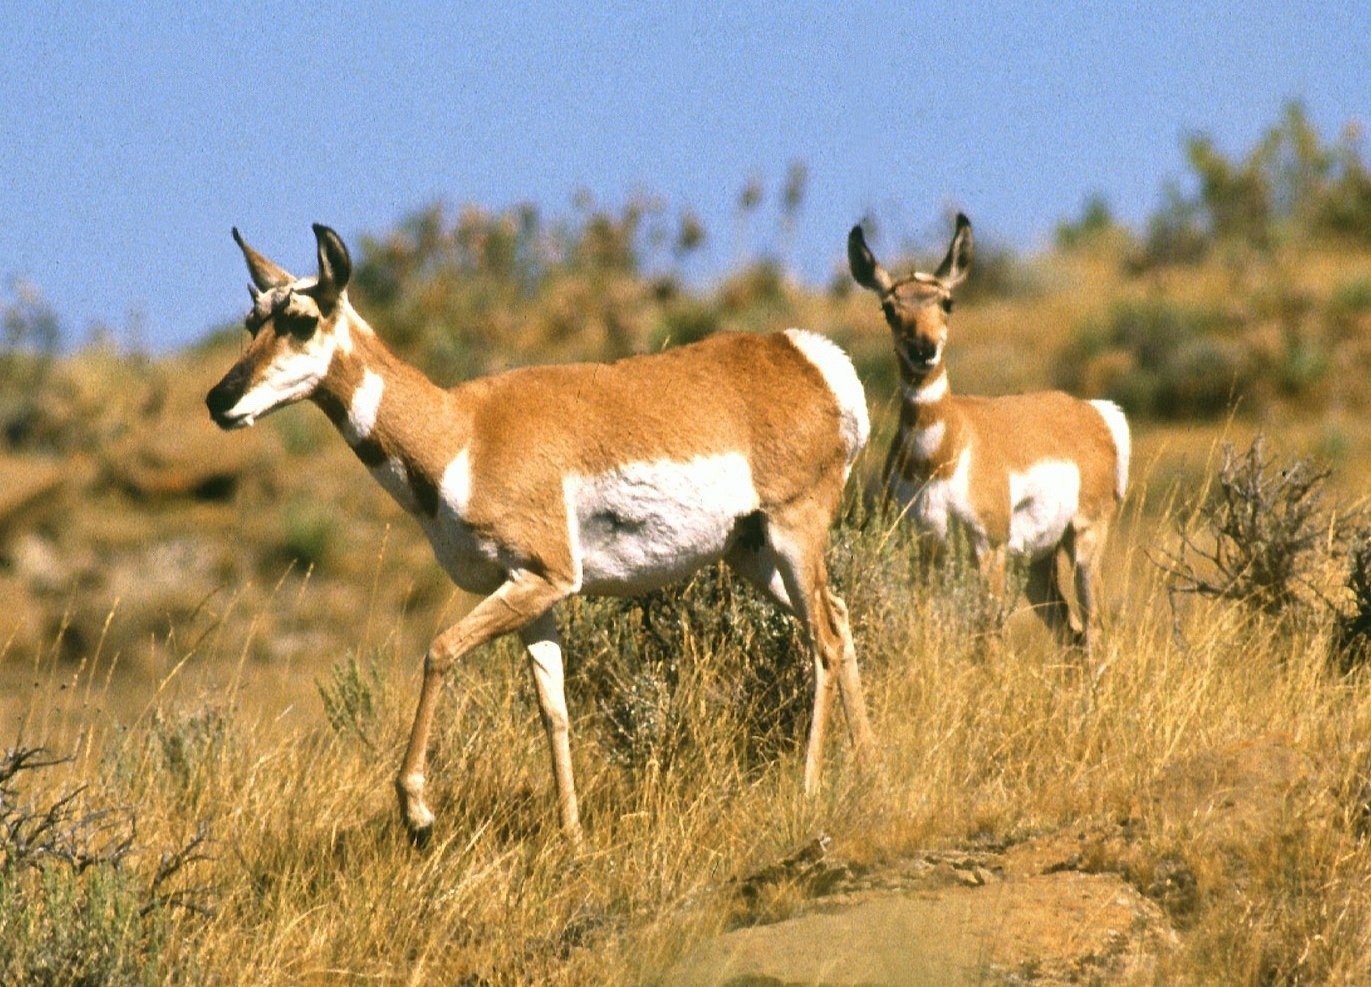 Pronghorn migrate long distances across both public and private land, with the &quot;Path of the Pronghorn&quot; stretching between Grand Teton National Park and Wyoming's Red Desert being a heralded and fragile route.  For pronghorn populations across the West, open working ranch lands, free of development, are crucial to the ecological function of the passageways. Photo courtesy Jack Dykinga/USDA Agricultural Research Service